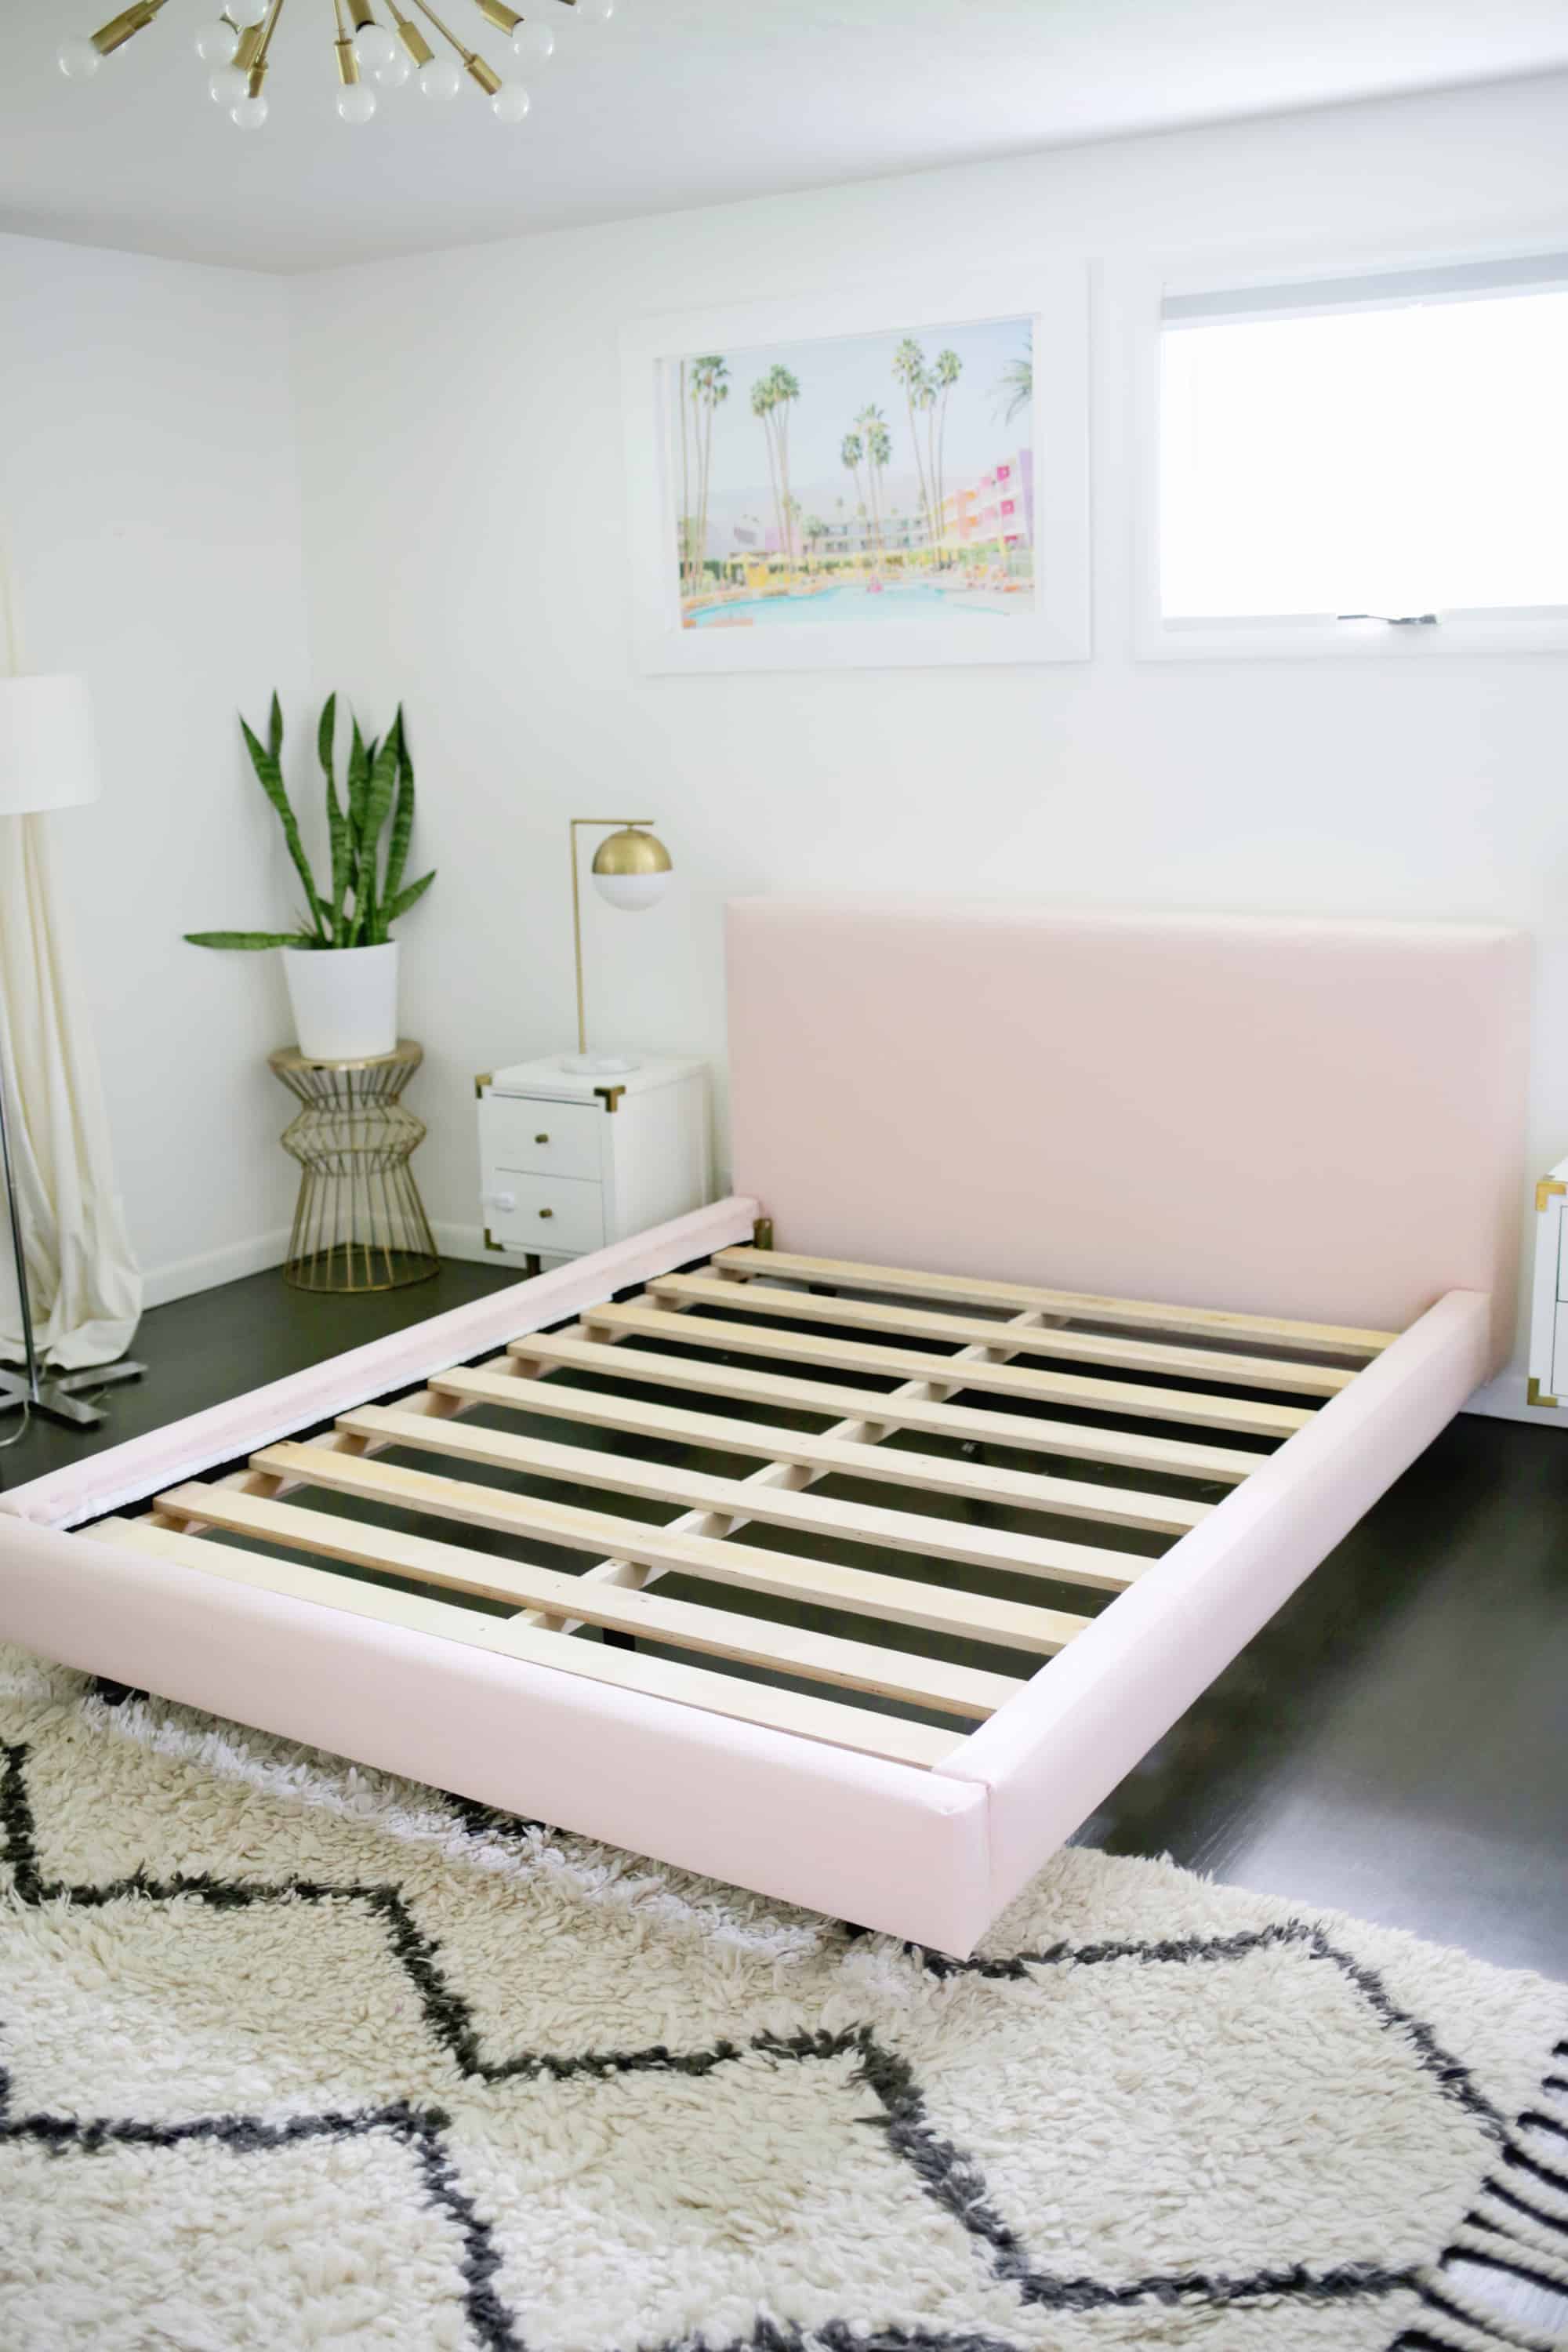 Reupholster Your Bed Frame In One, Get Rid Of Old Bed Frame